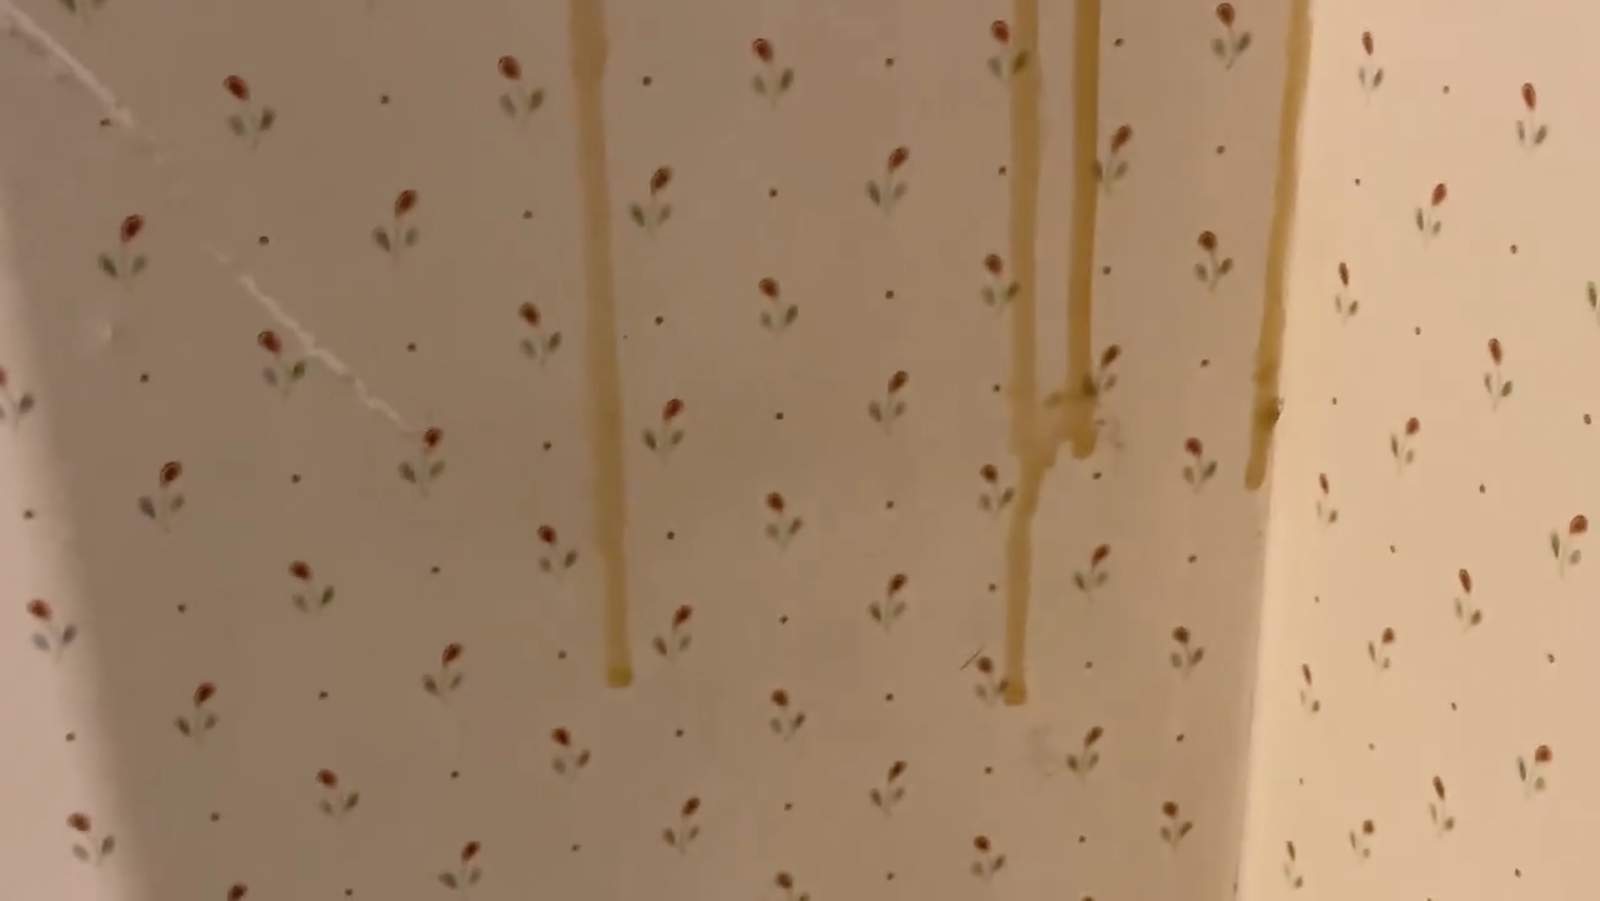 Couple finds out theyre living with thousands of bees after fresh honey drips down their walls